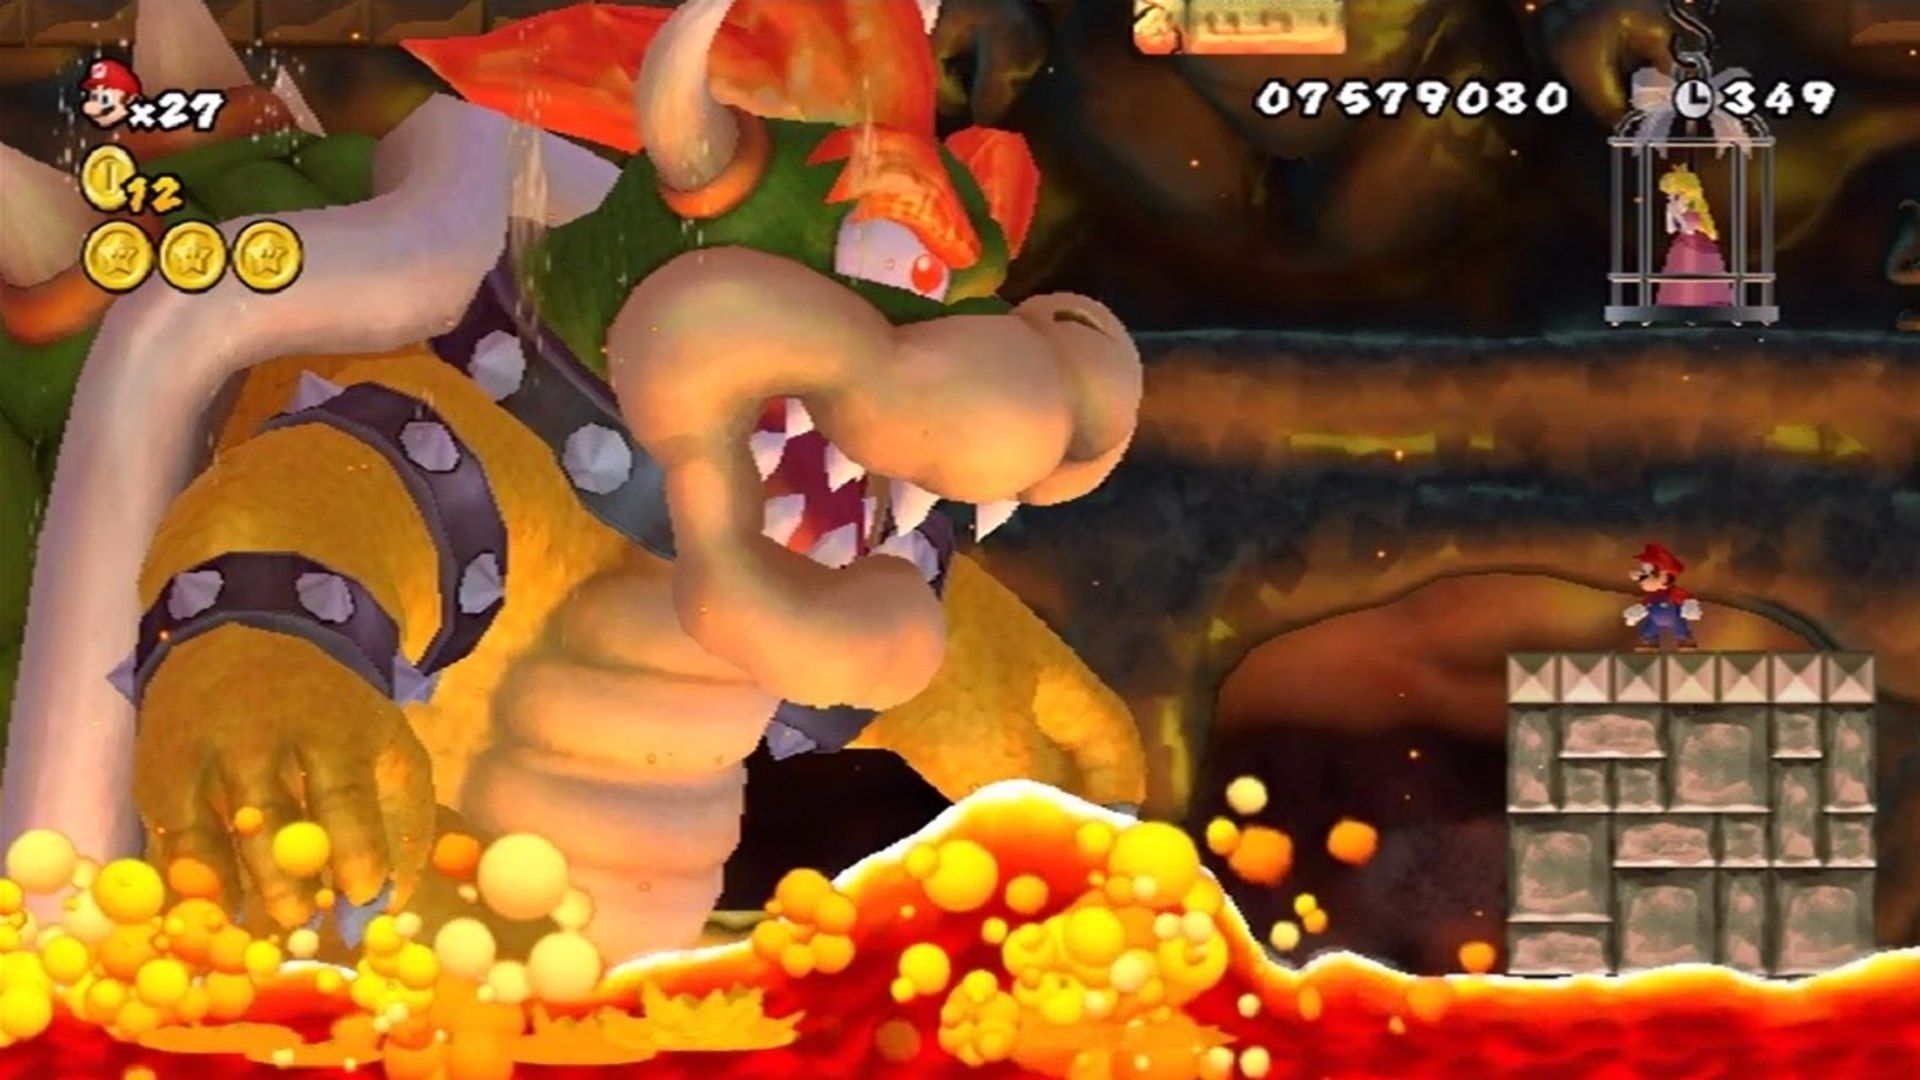 Super Mario Every Bowser Battle In Gaming History Ranked 7238